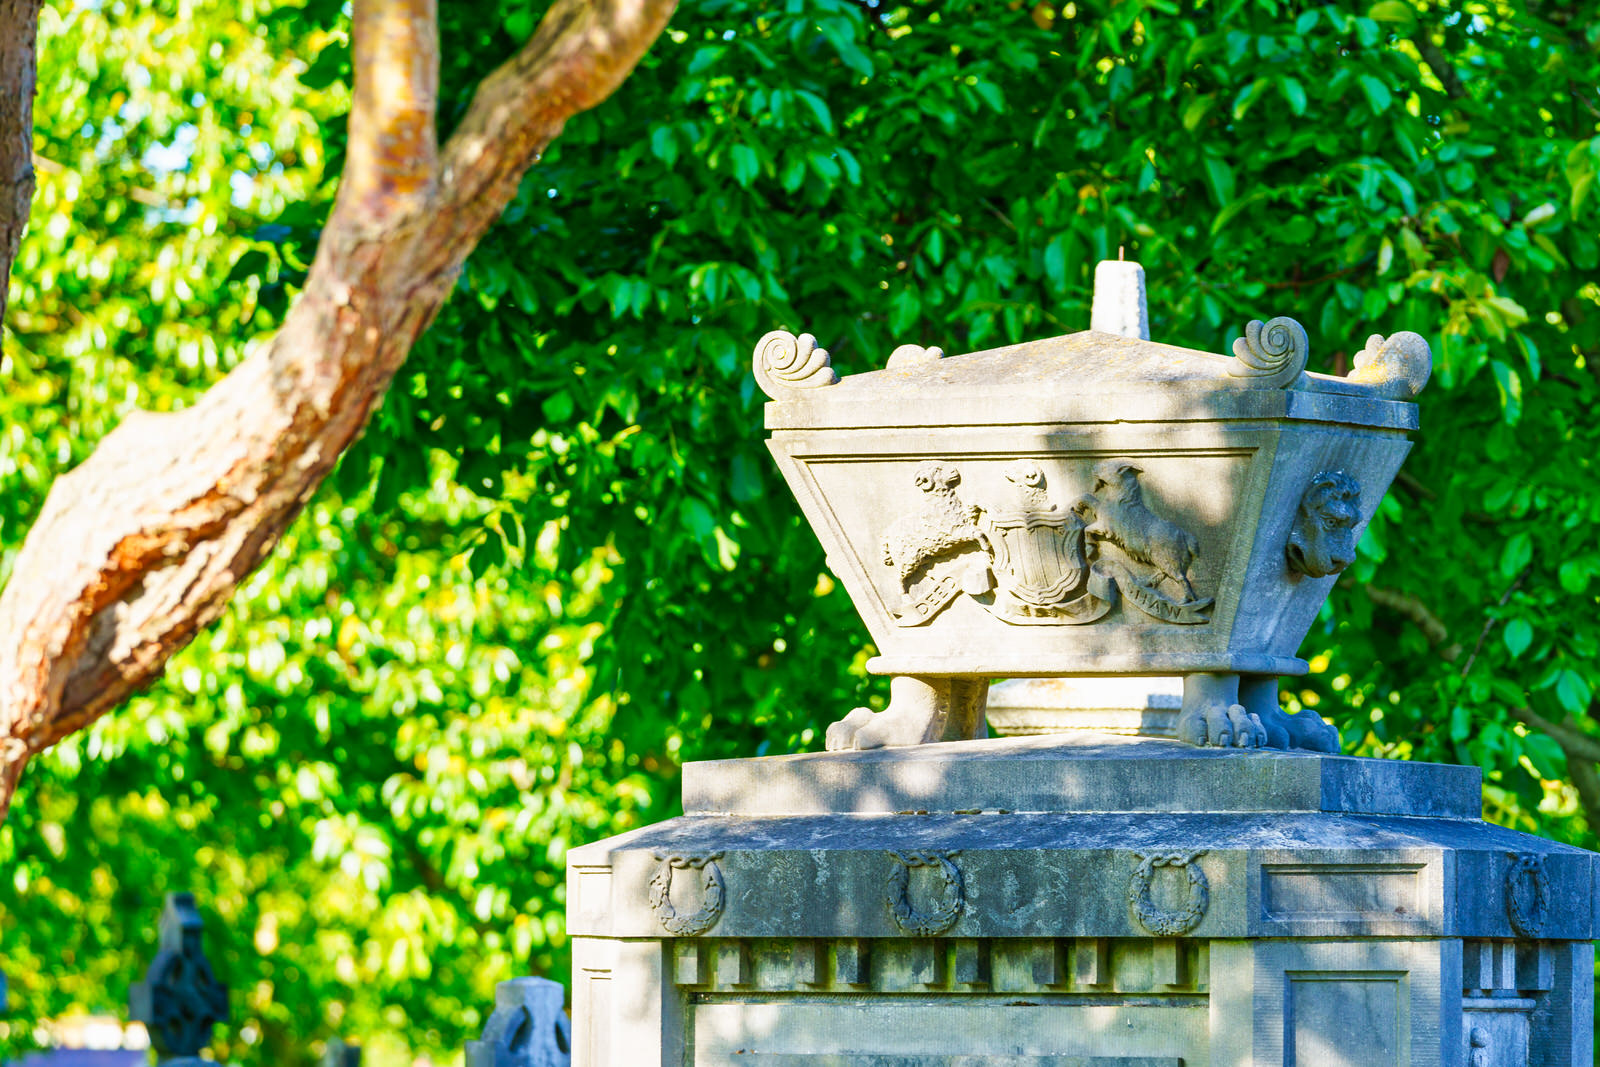 THE OLDER SECTION OF GLASNEVIN CEMETERY [I USED A SONY 70-200MM GM LENS] 001